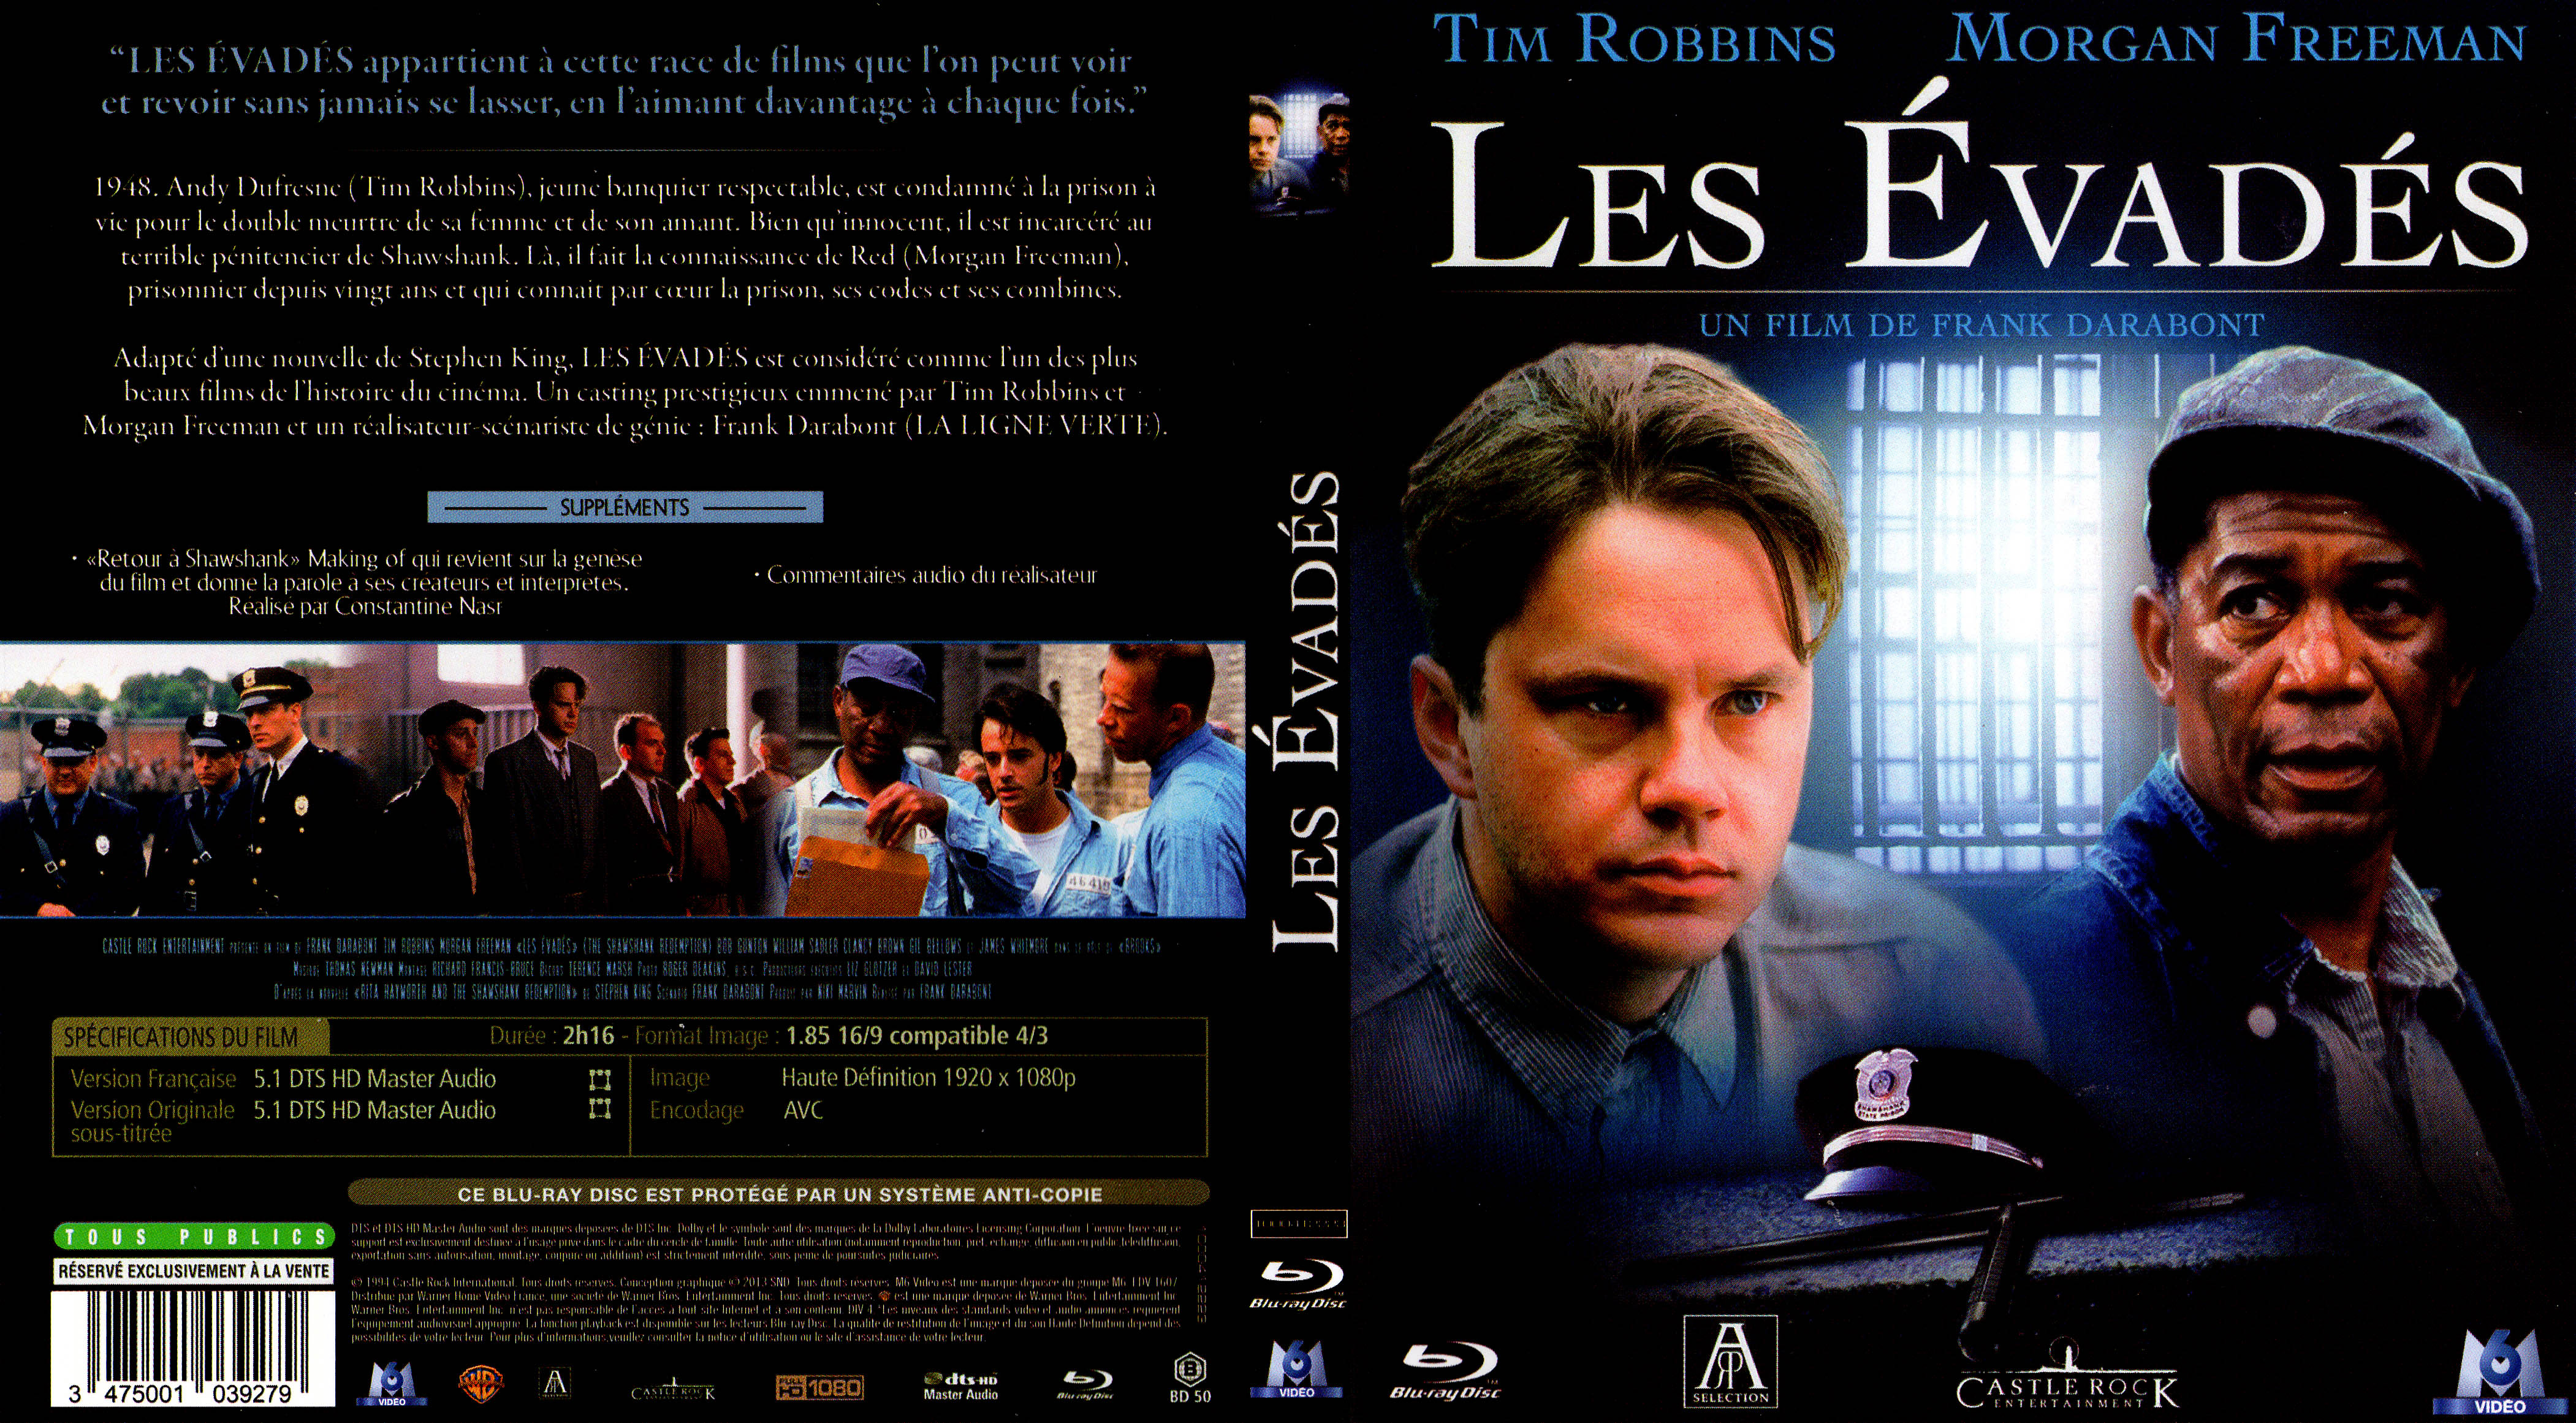 Jaquette DVD Les vads (BLU-RAY) v2